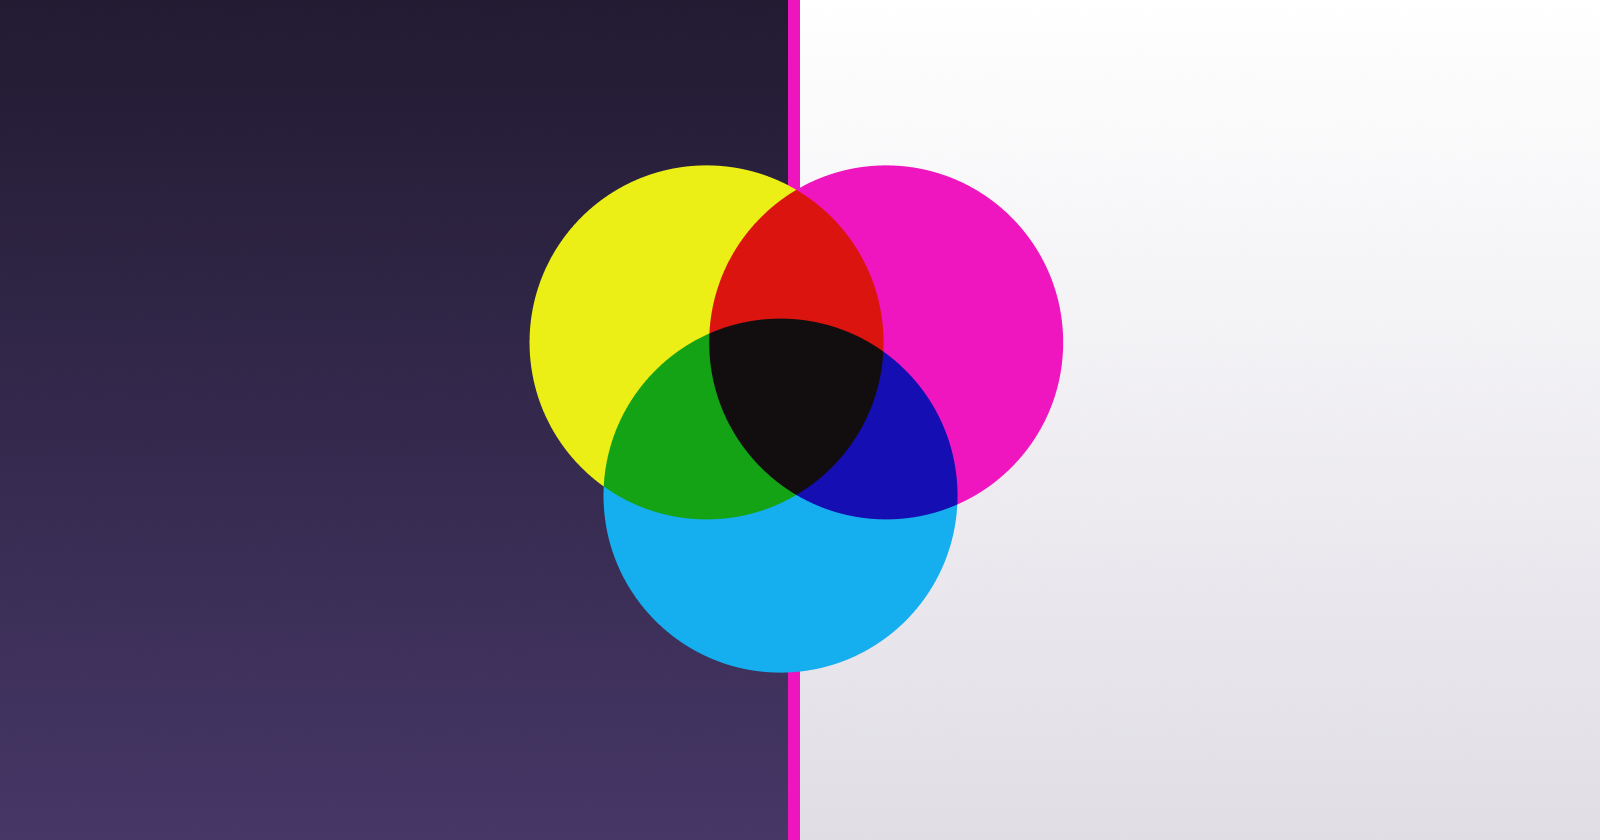 CMYK banner, 3 circles overlaying each other like a Venn diagram (pink, yellow, blue) where centre is nearly black. Background is half dark purple, half white, with a vertical pink line going down the middle between the 2 halves.